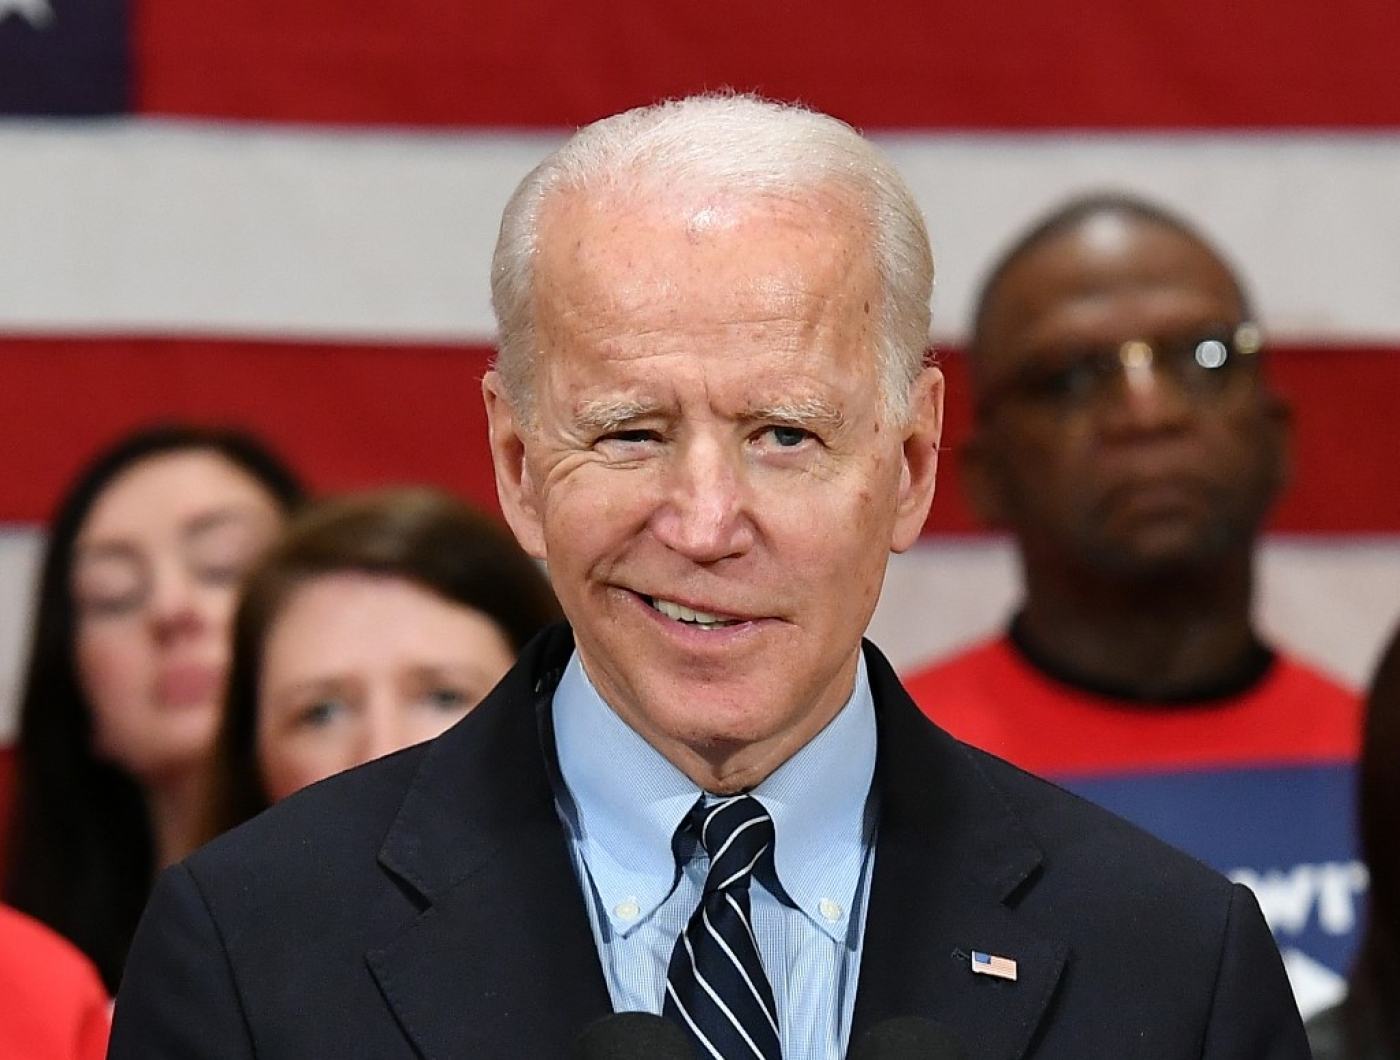 a-biden-presidency-would-perpetuate-us-mistakes-in-the-middle-east